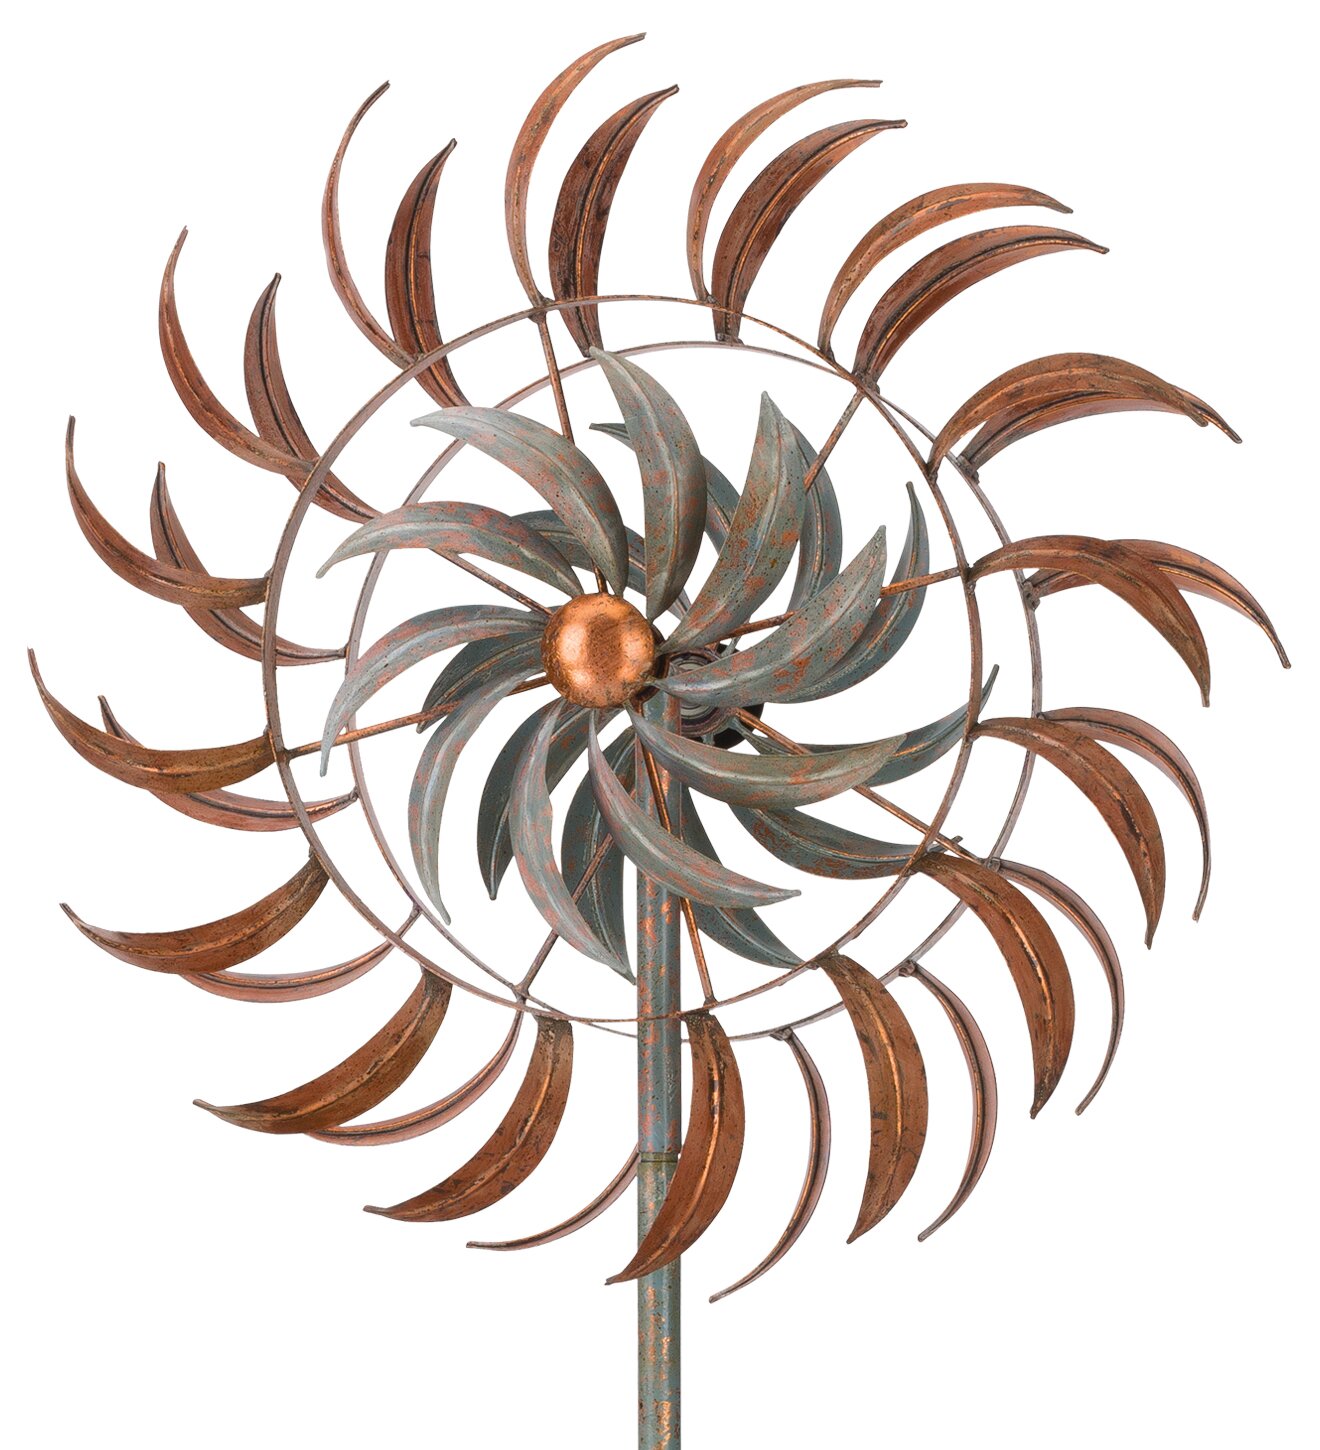 Regal Art & Gift Kinetic 24" Rotating Wind Spinner - Copper Petals & Reviews